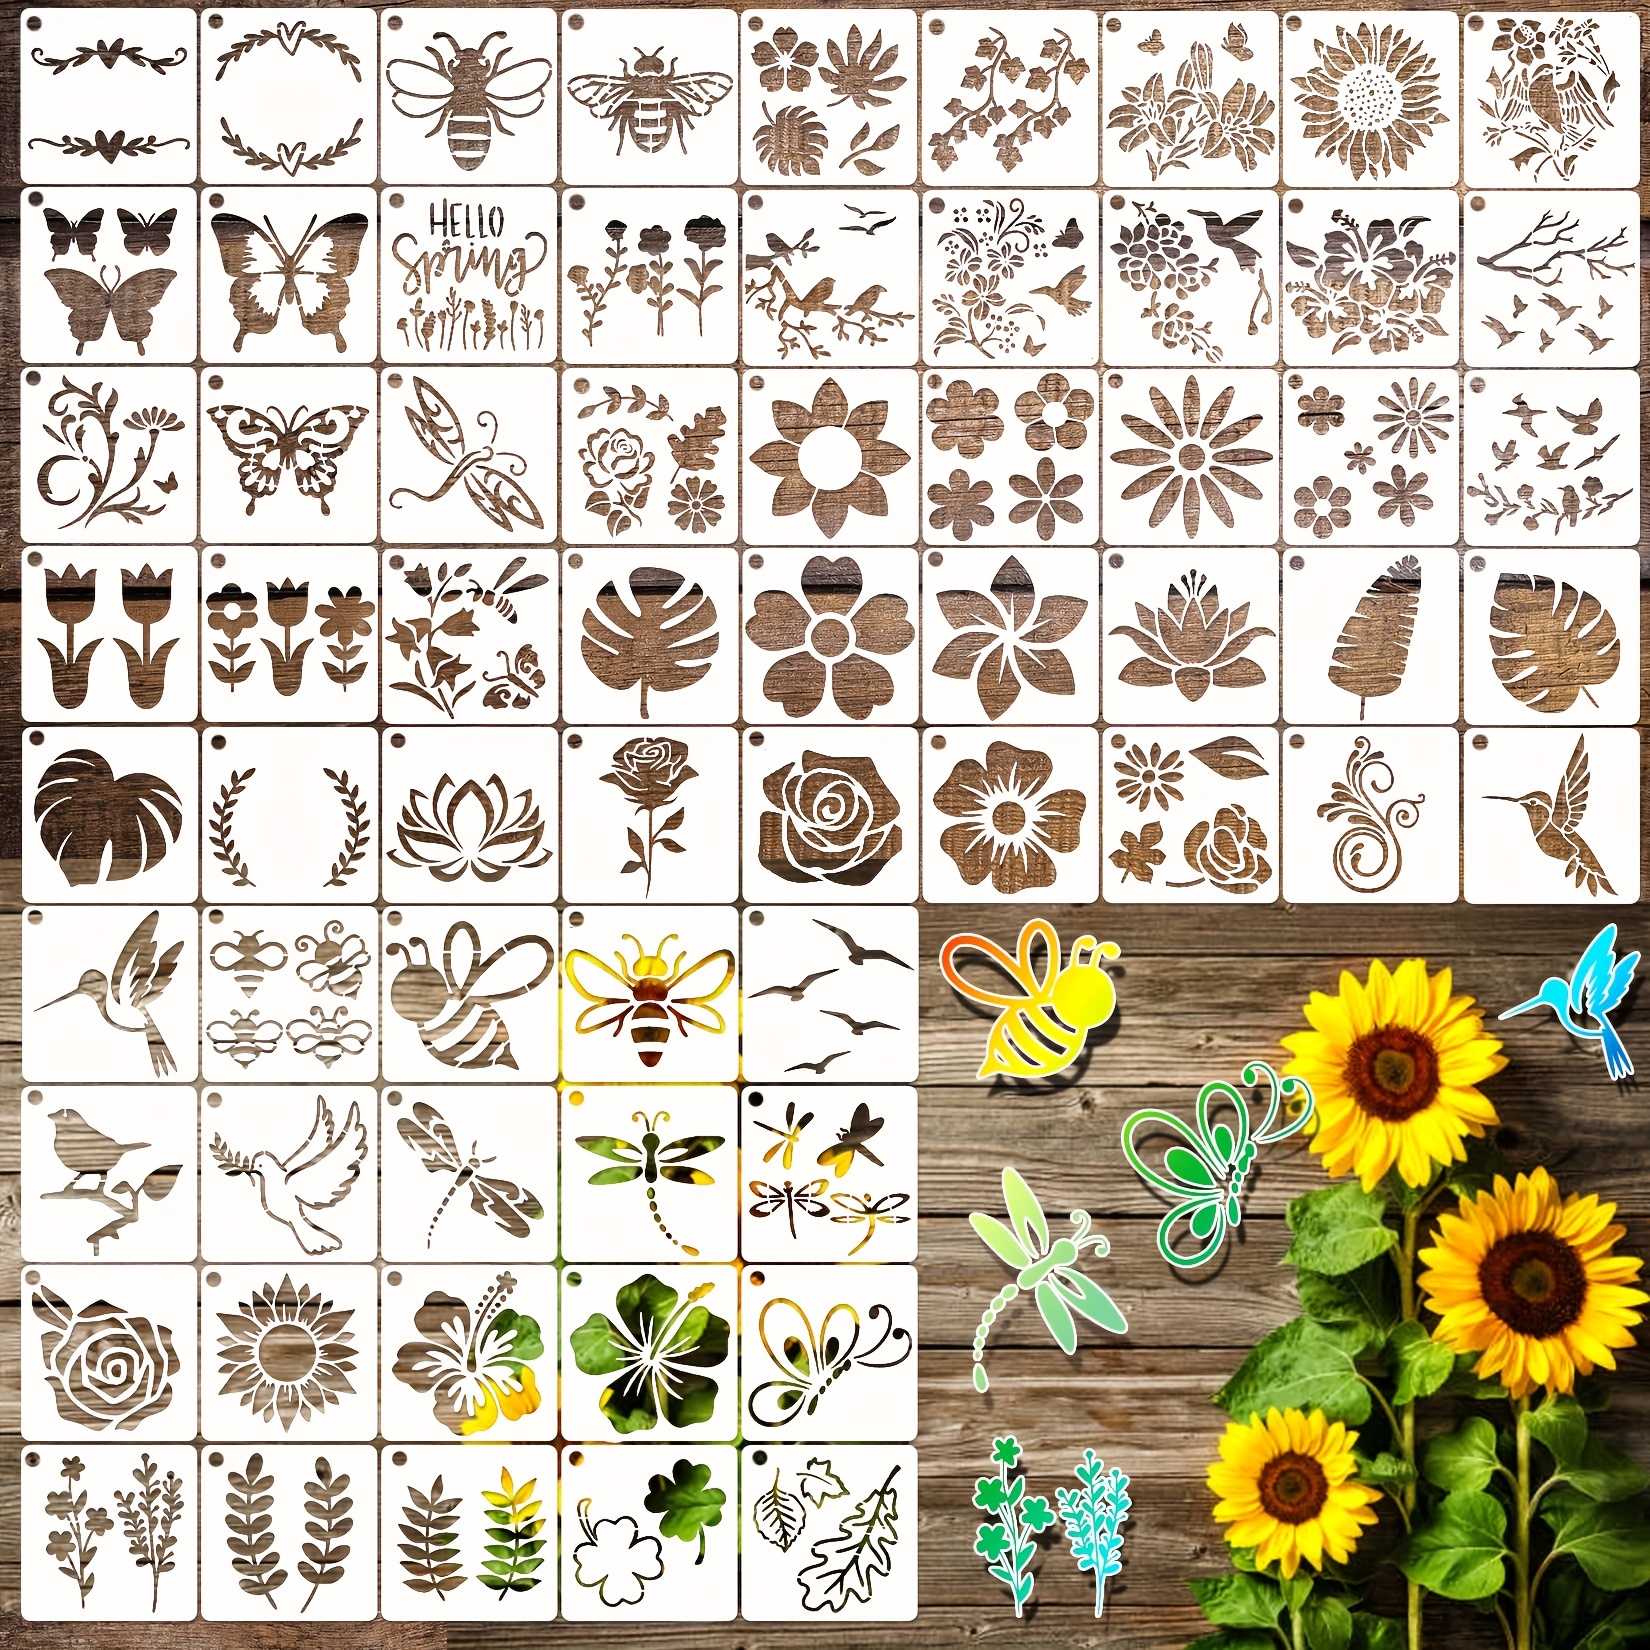 Flower Stencil,24 Pieces Birds Sunflower Floral Stencils Kit for Painting on Wood Canvas, Reusable Walls Branches Leaf Tree Rose Paint Drawings